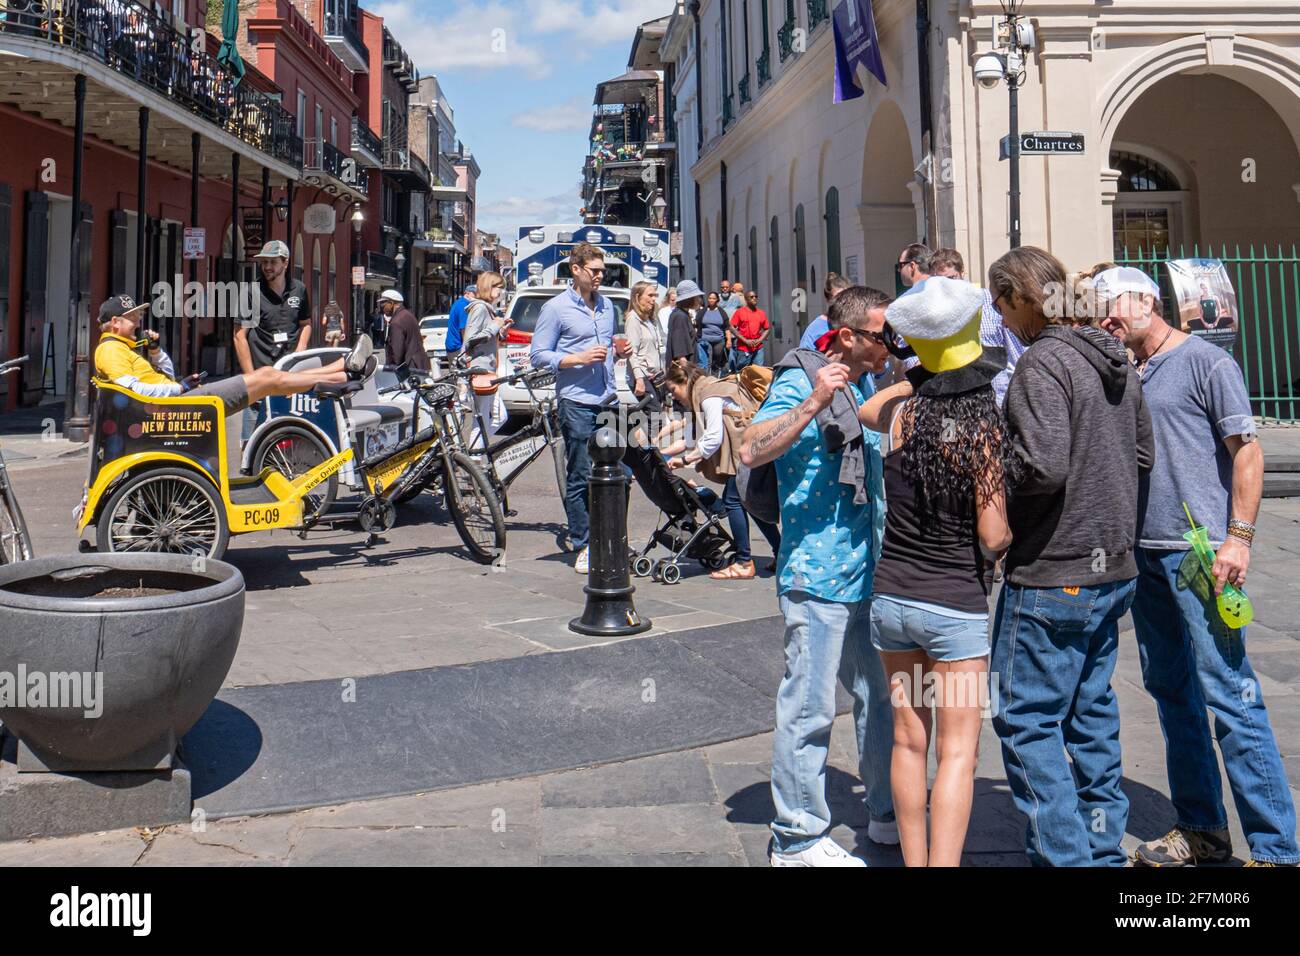 NEW ORLEANS, LA, USA - APRIL 14, 2019: People gathering near the Cabildo on Chartres Street during French Quarter Festival Stock Photo